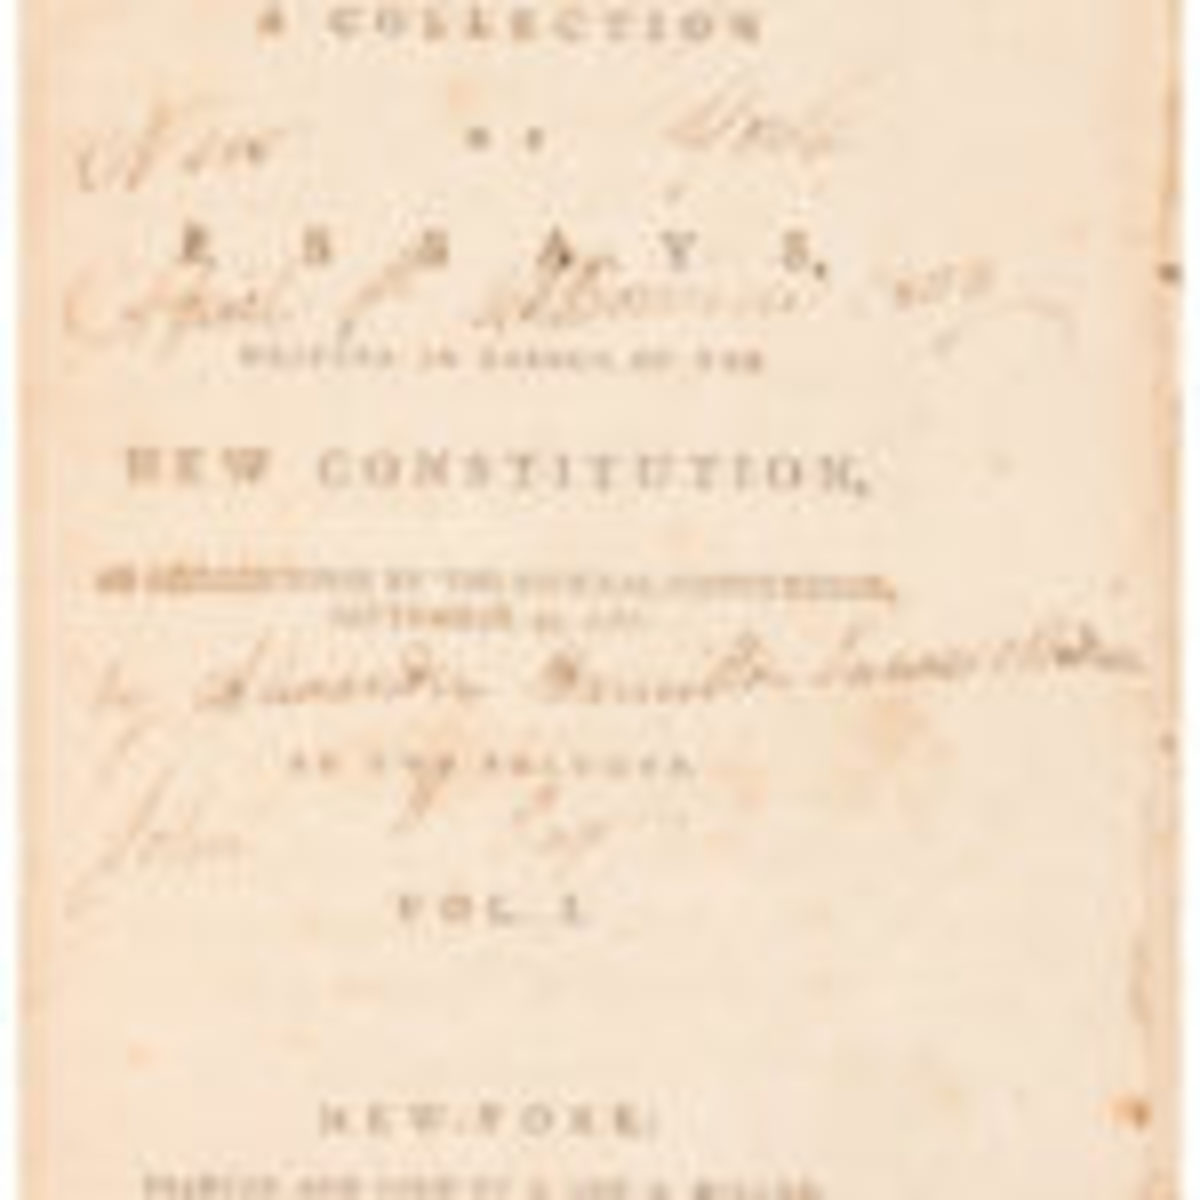 The Federalist title page.